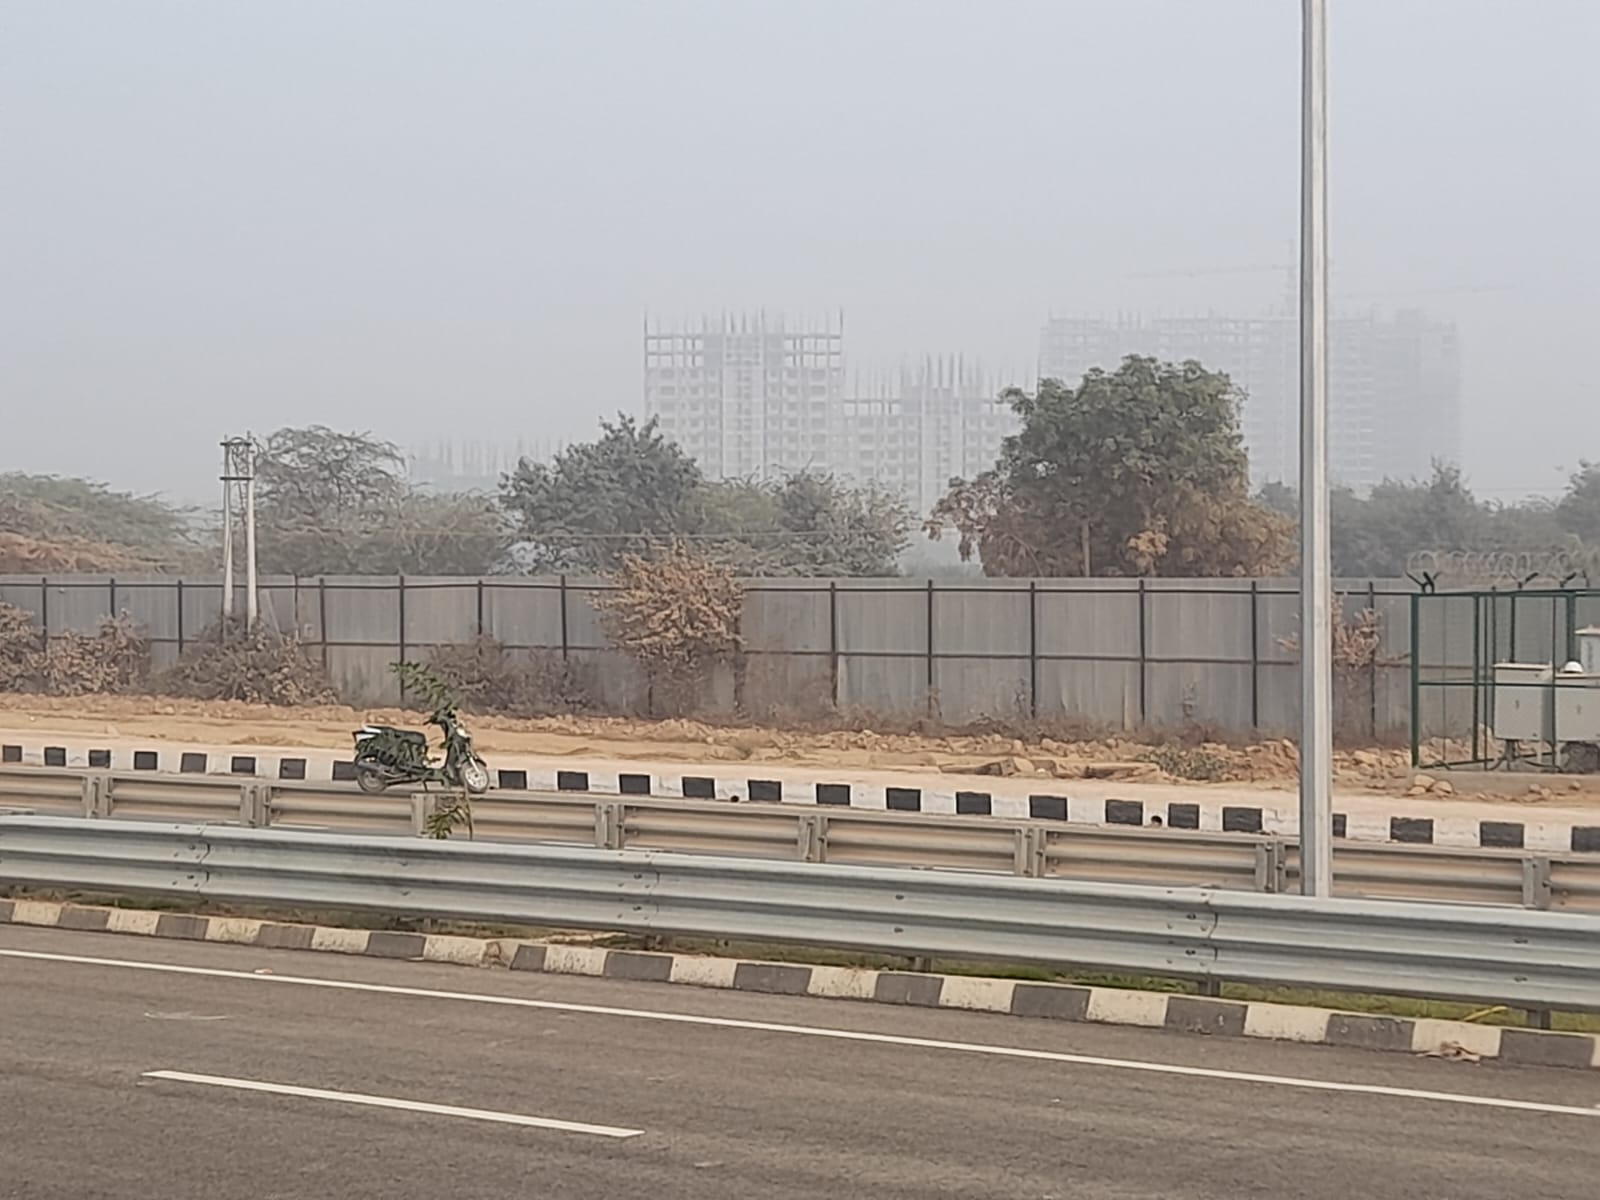 Dwarka Expressway & Cloverleaf Anticipated to Open on 29th February